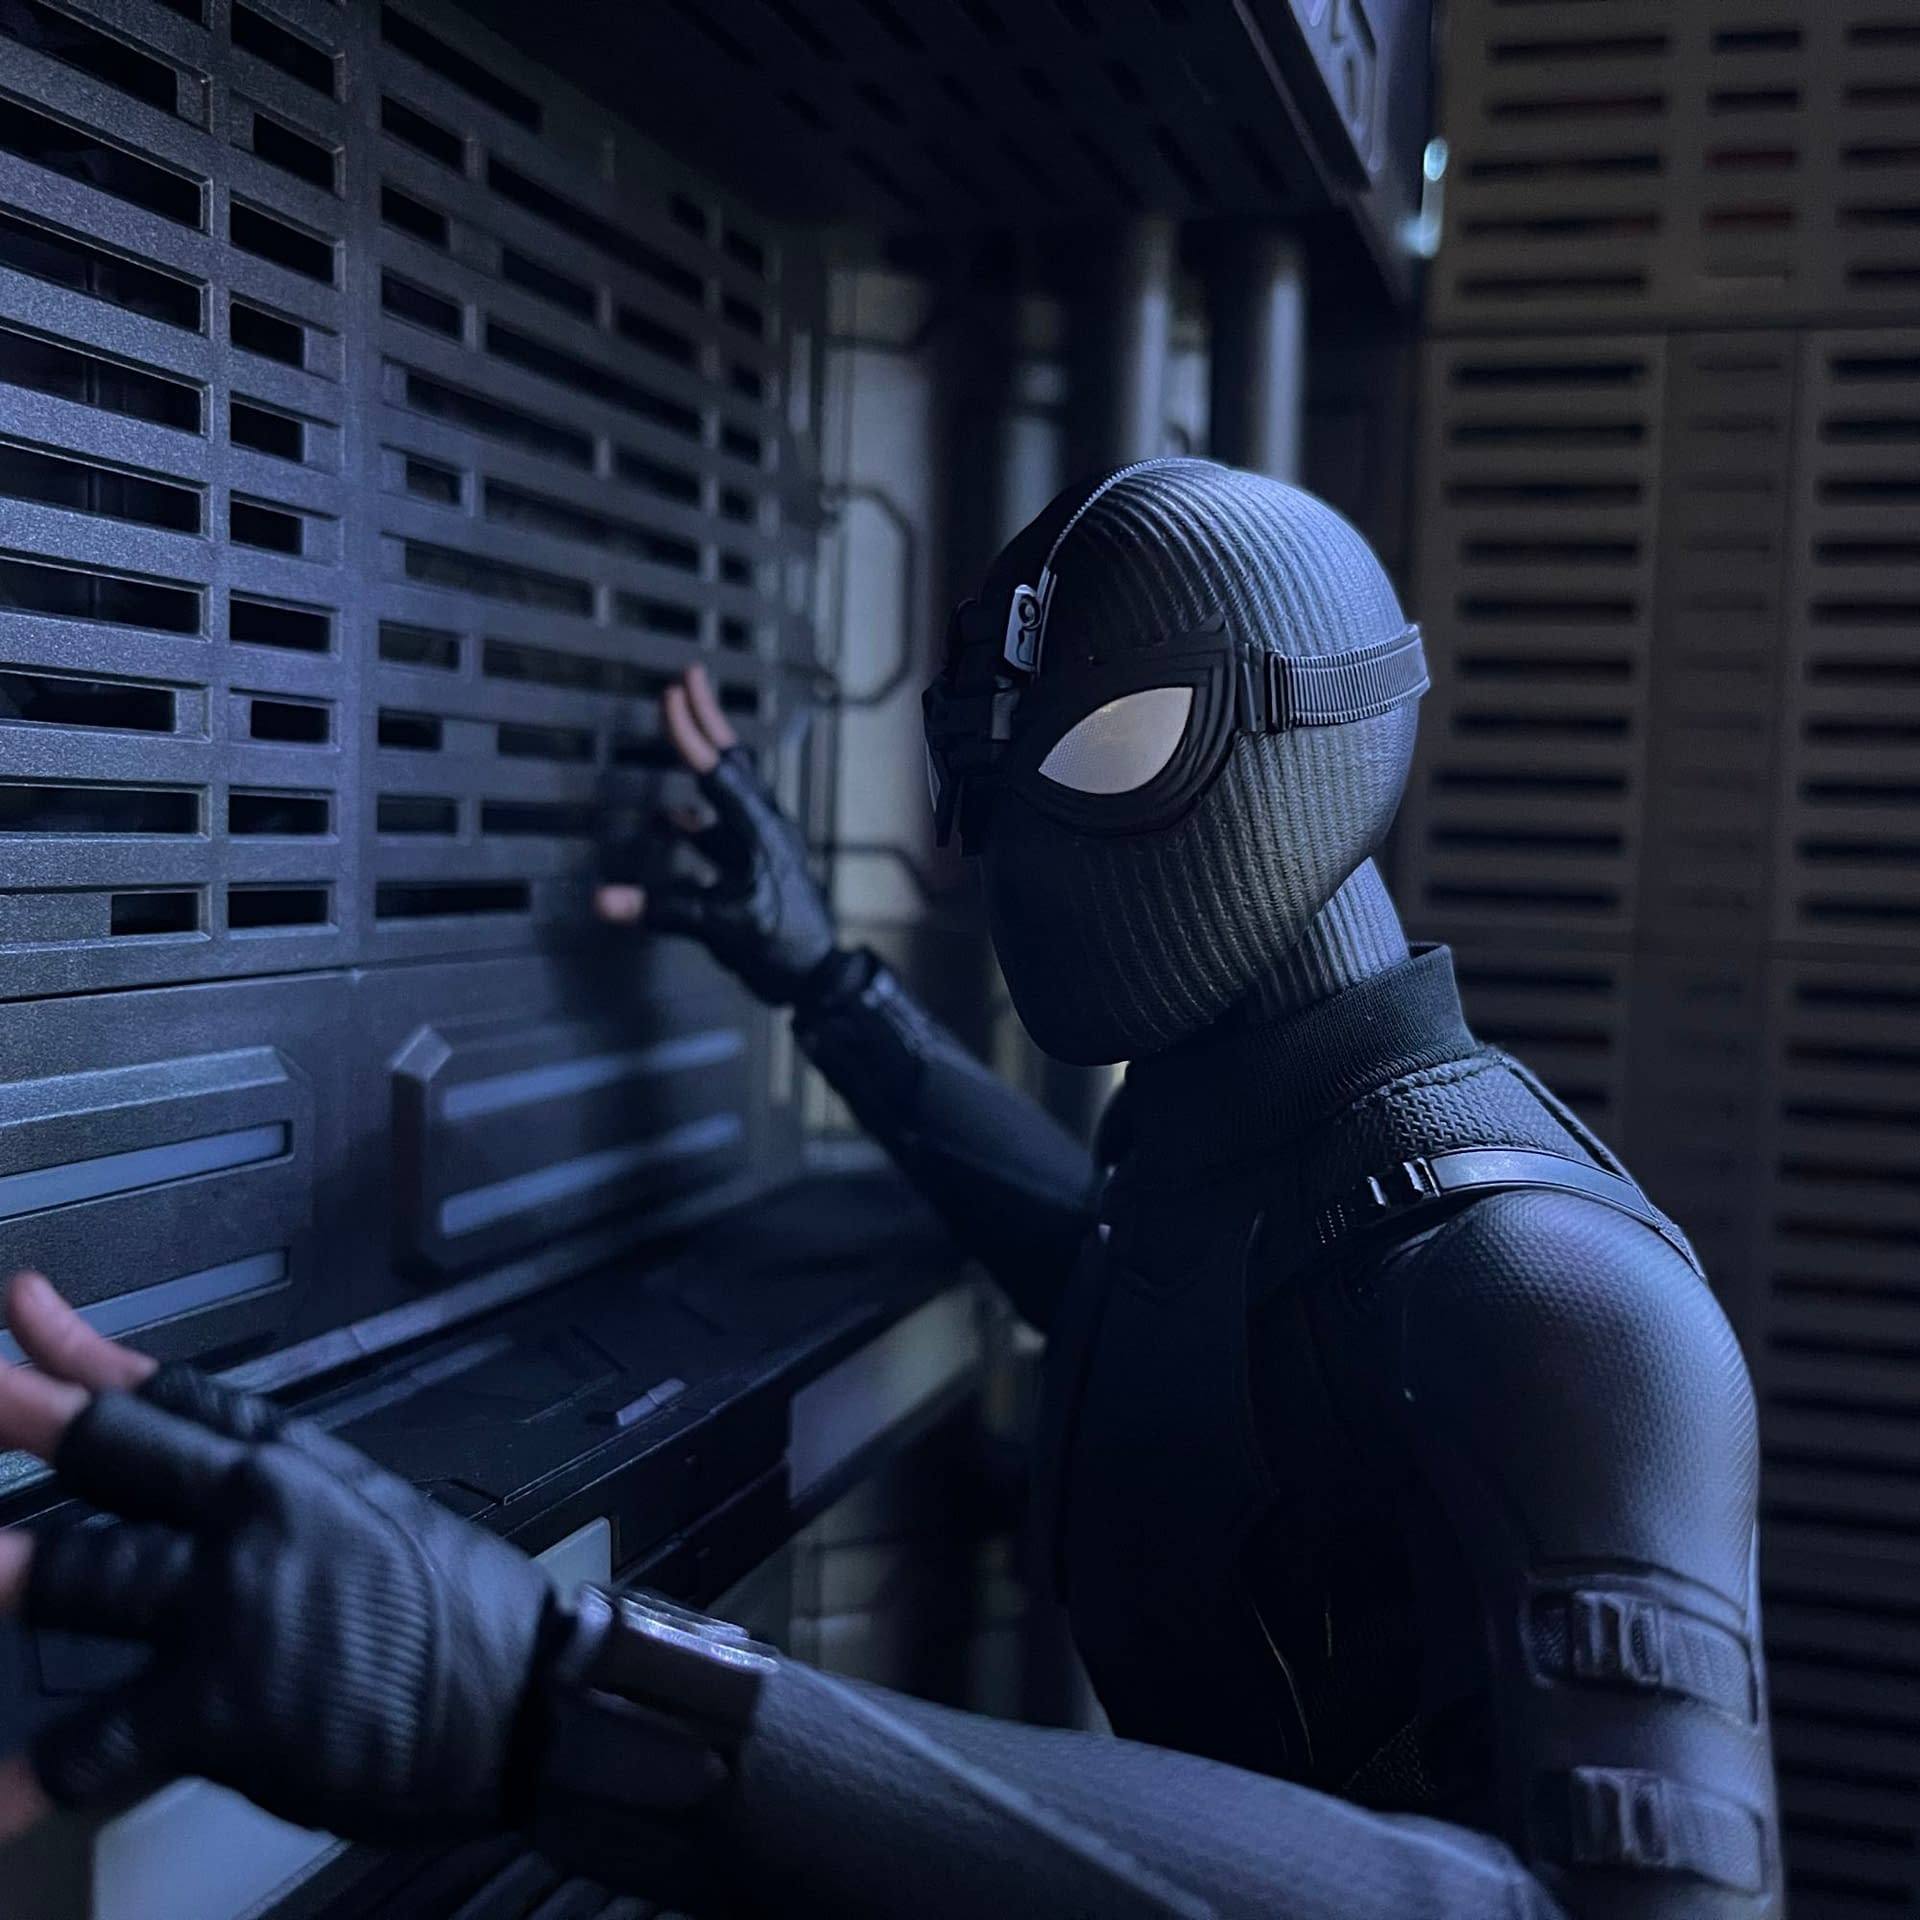 Hot Toys Explore the Spider-Verse - MCU Spider-Man (Stealth Suit) 